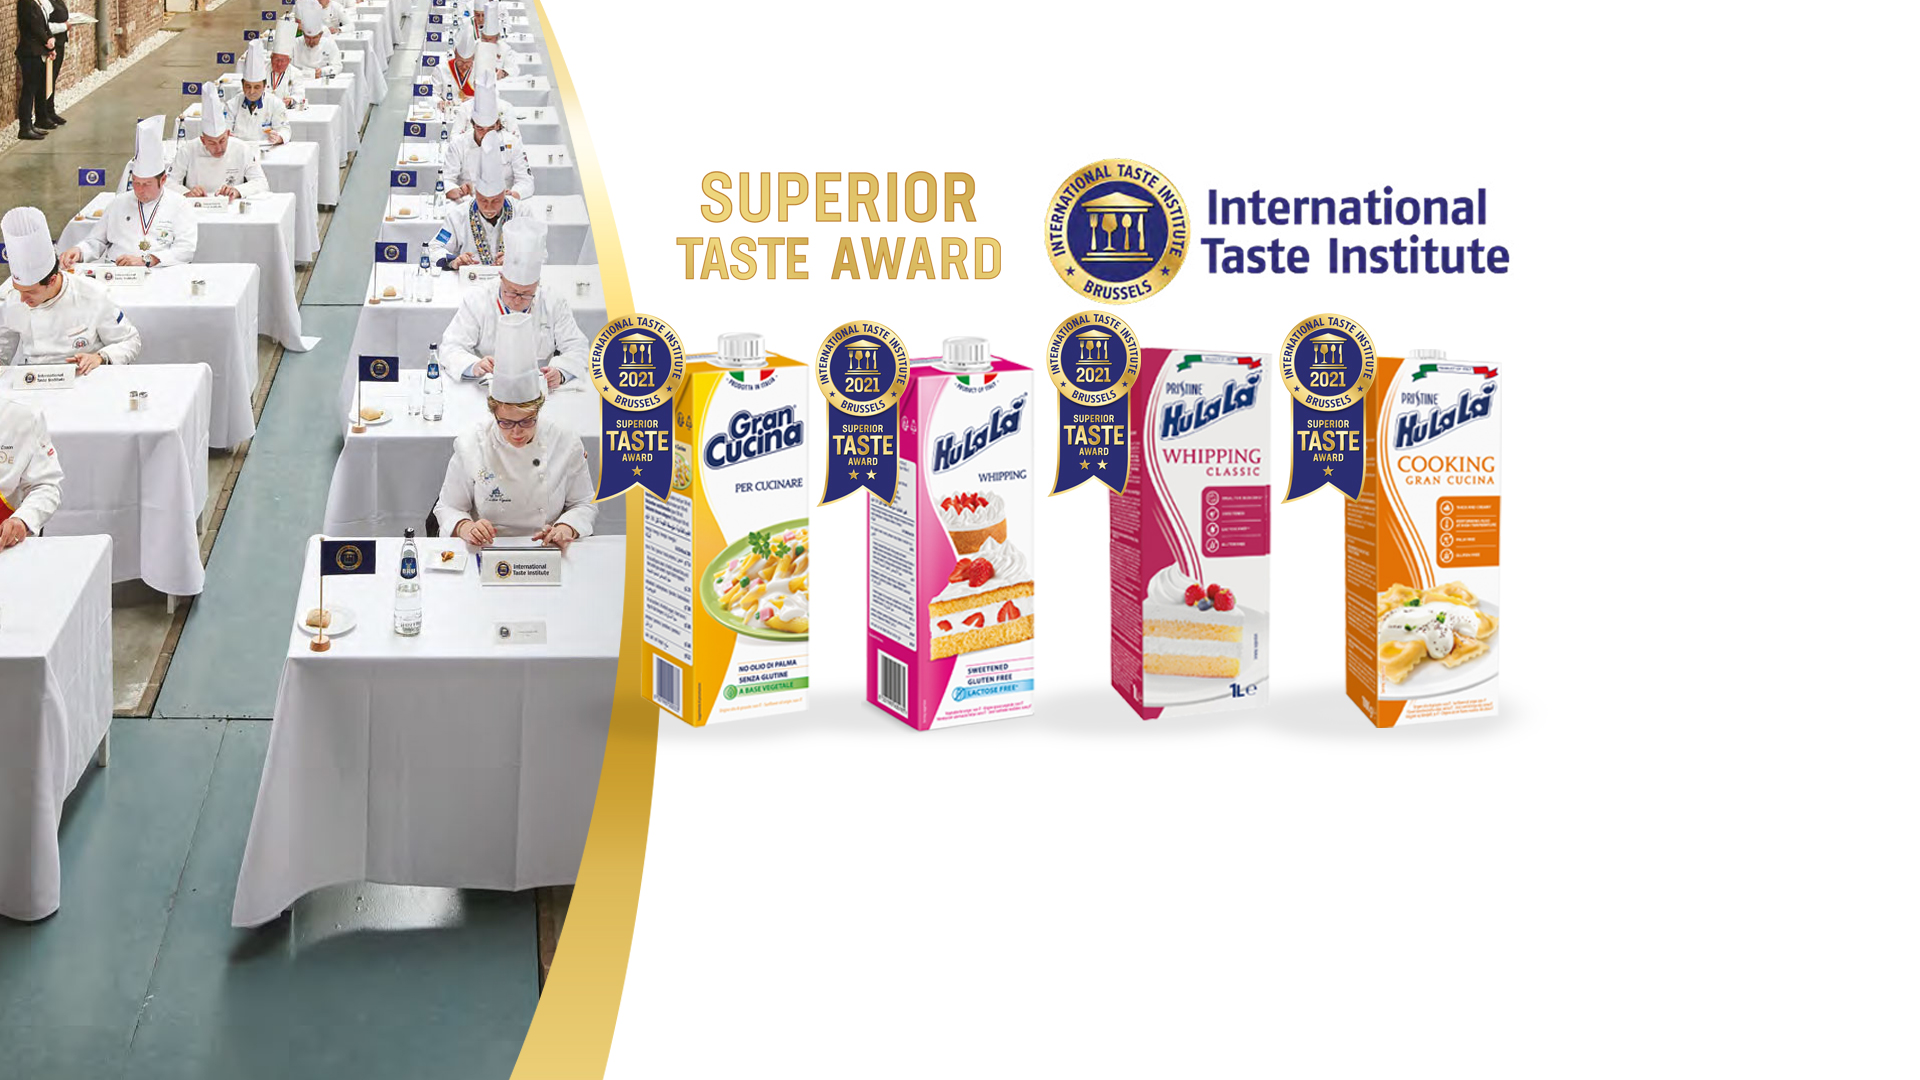 Gran Cucina and Hulalà creams awarded by International Taste Institute